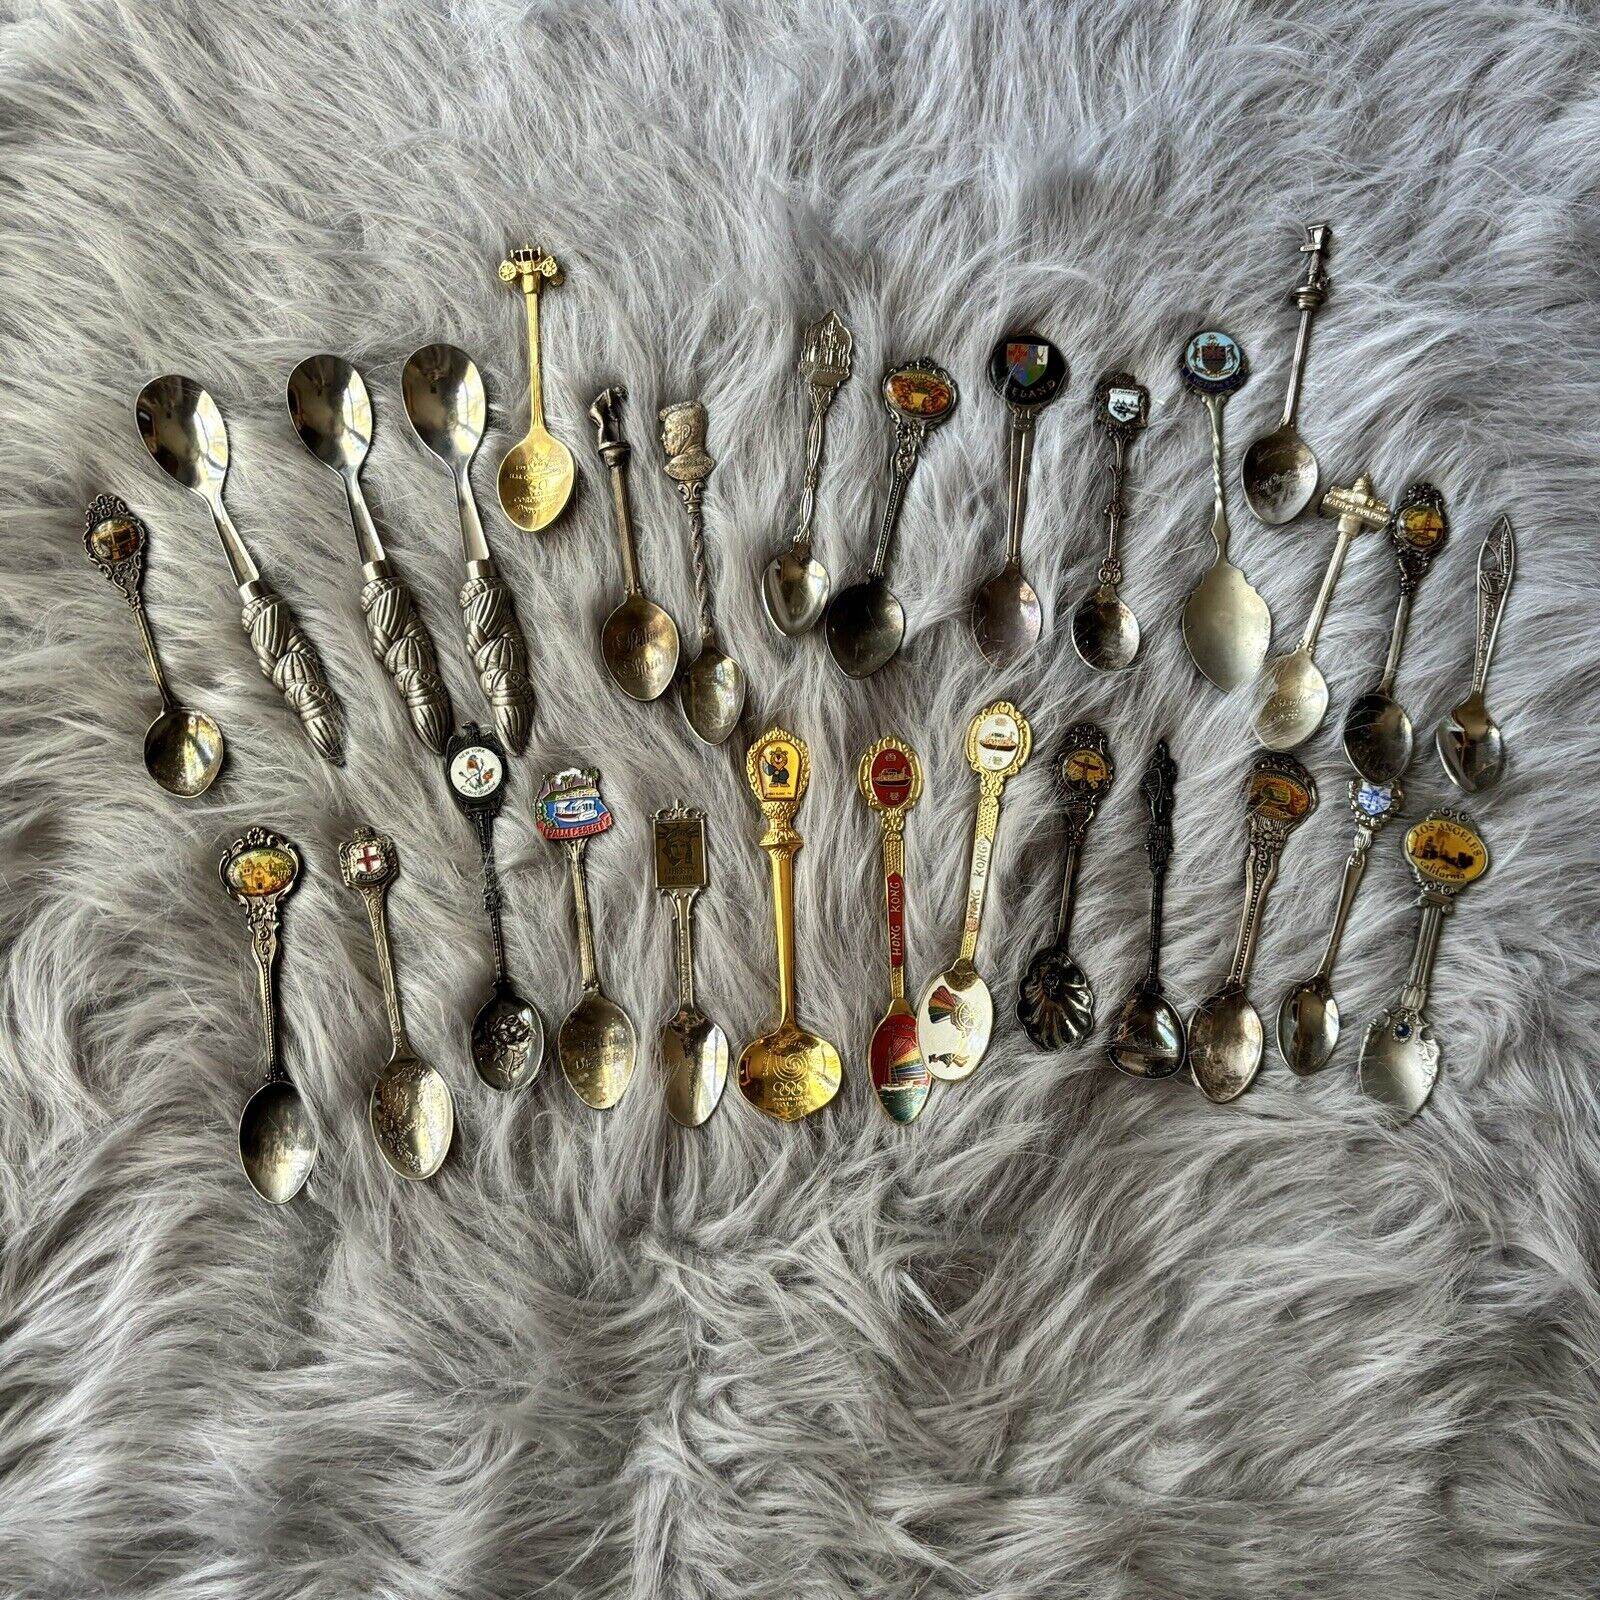 Lot of 29 Vintage Souvenir Collector Spoons Assorted Countries Silverplated